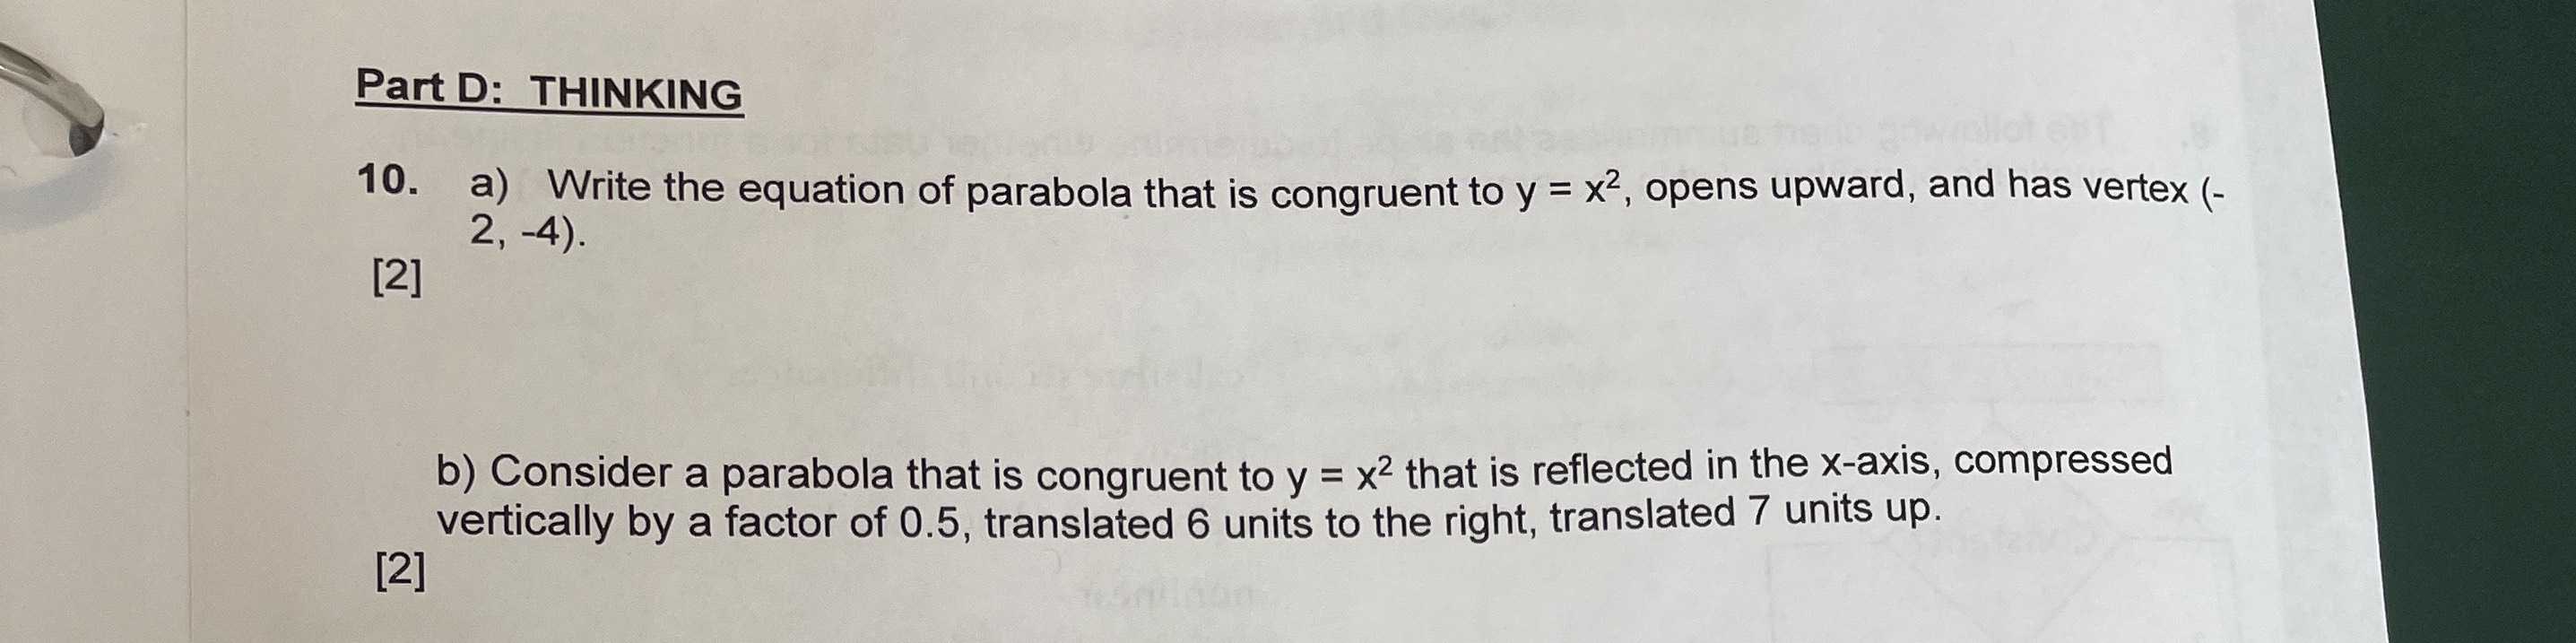 10. a) Write the equation of parabola that is cong...